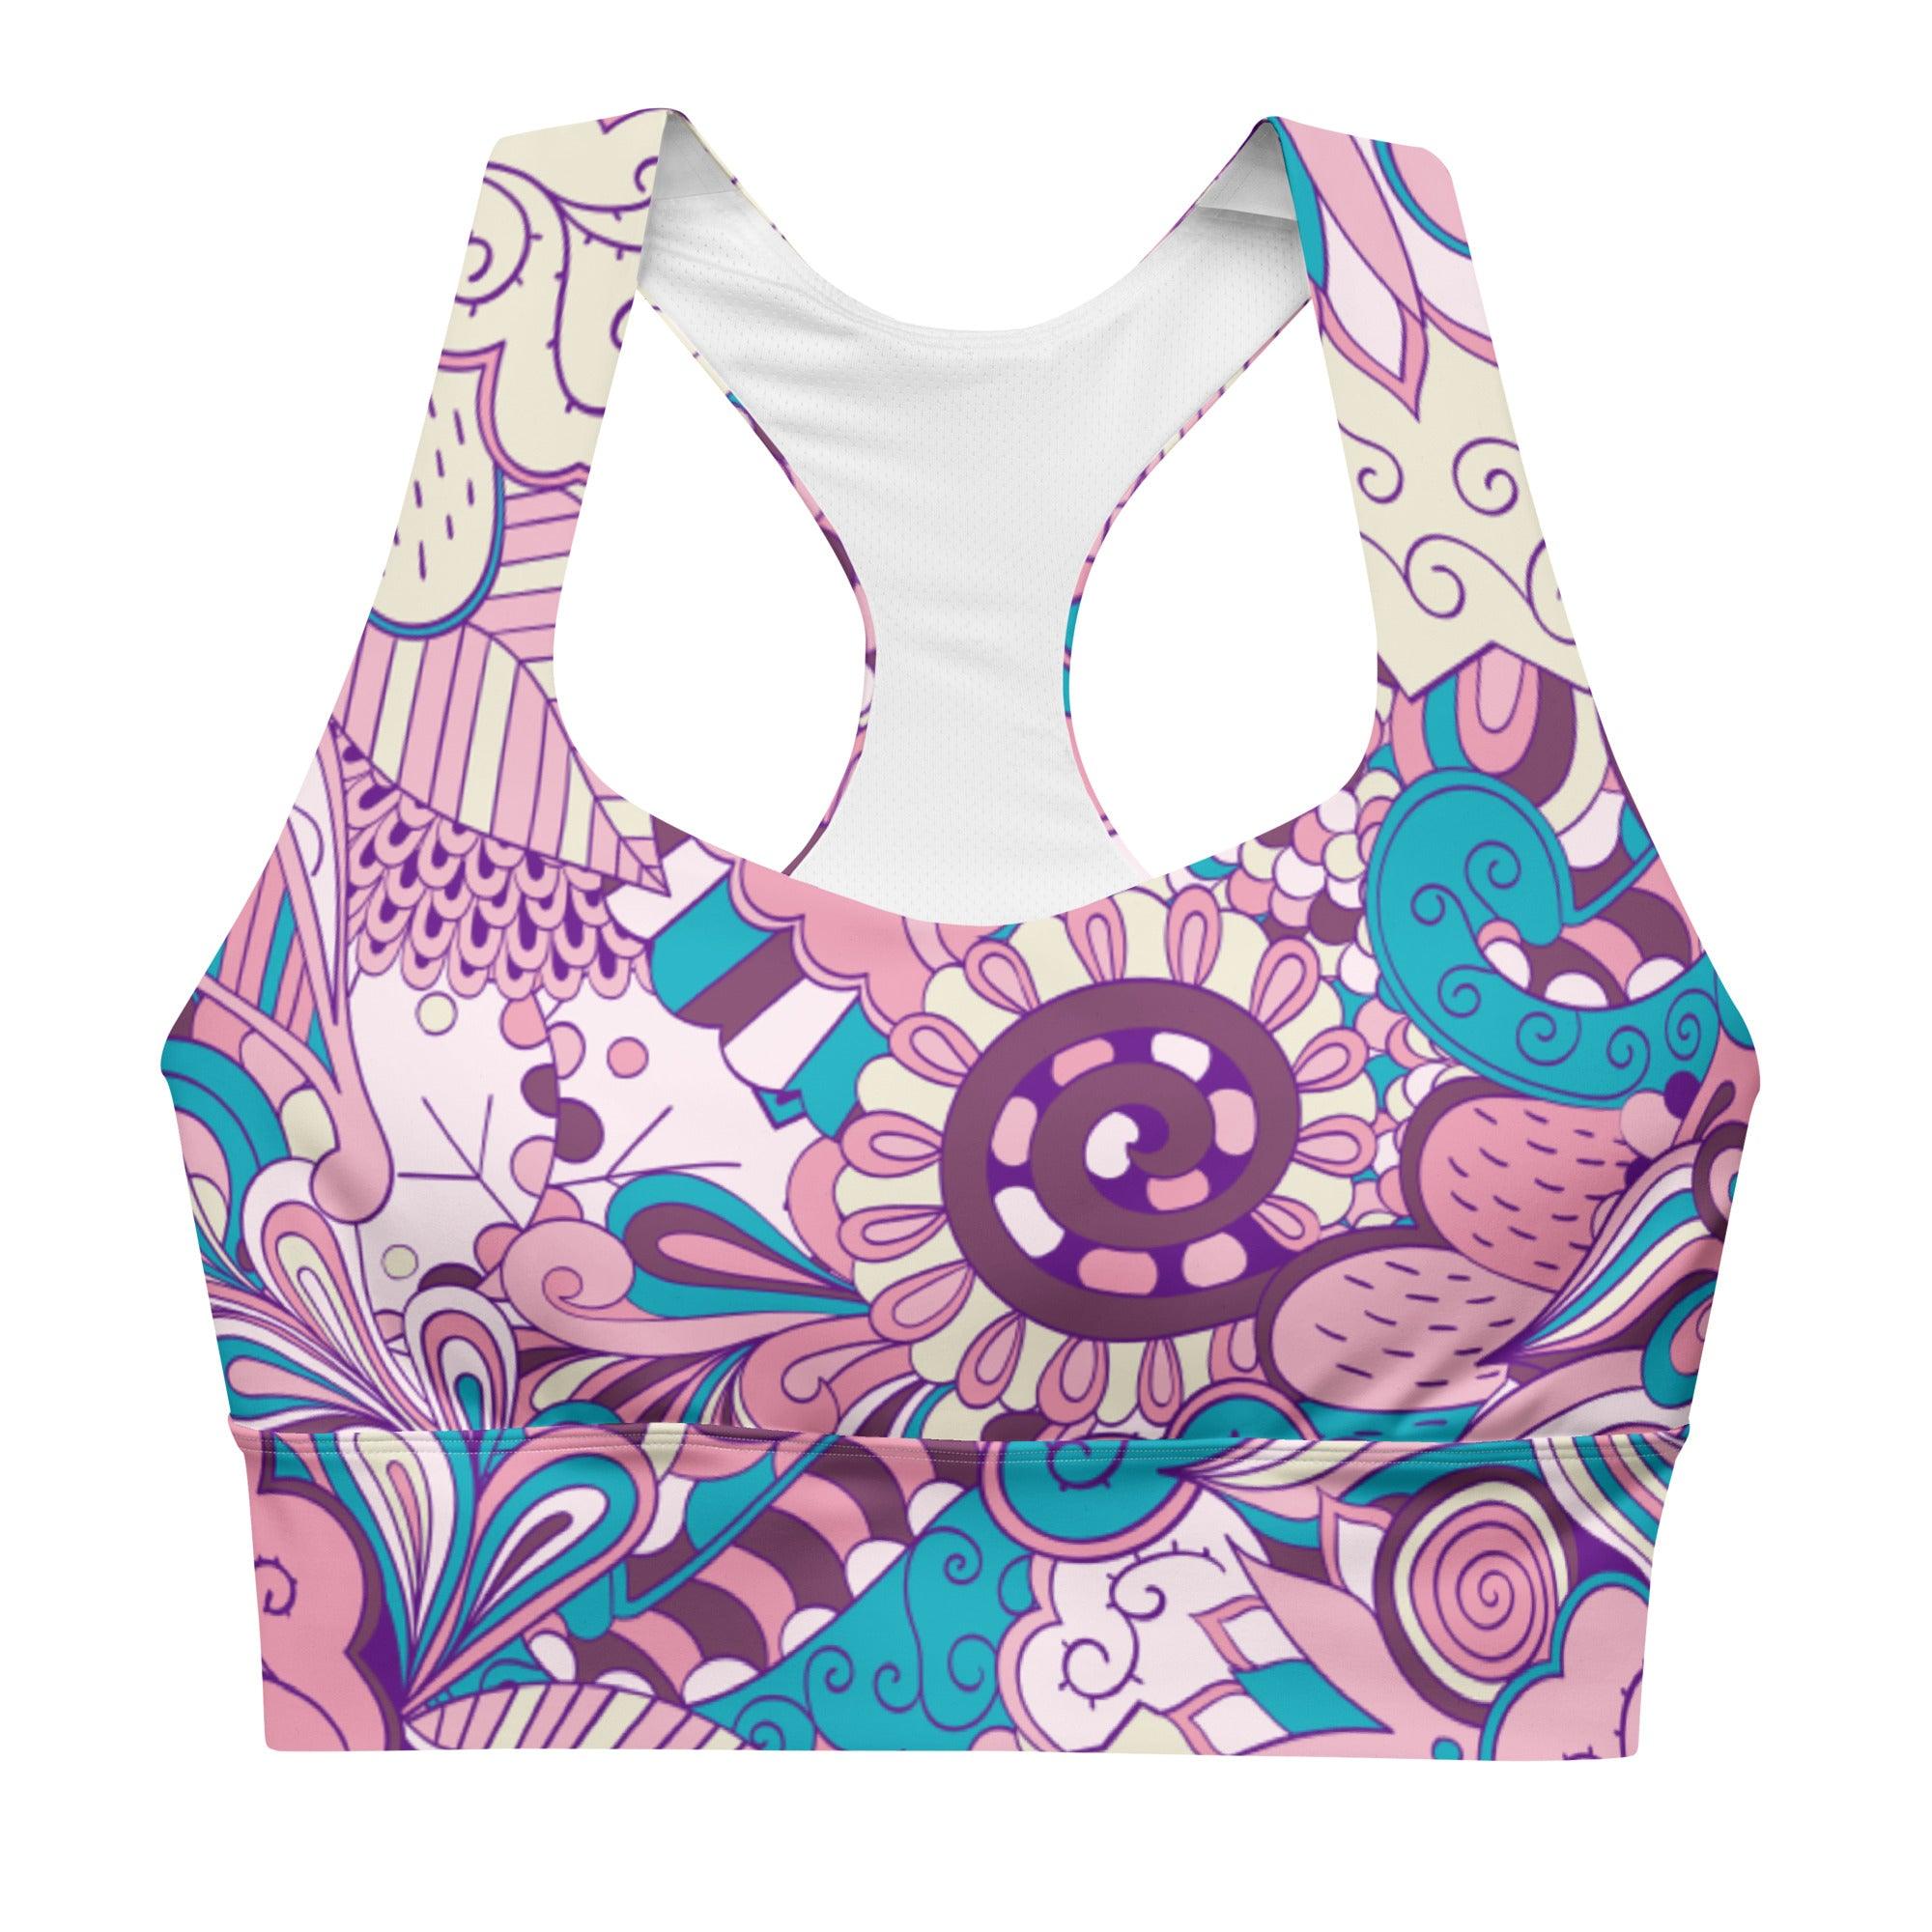 Antina Longline Sports Bra - All Over Abstract Psychedelic Print - Pink Violet